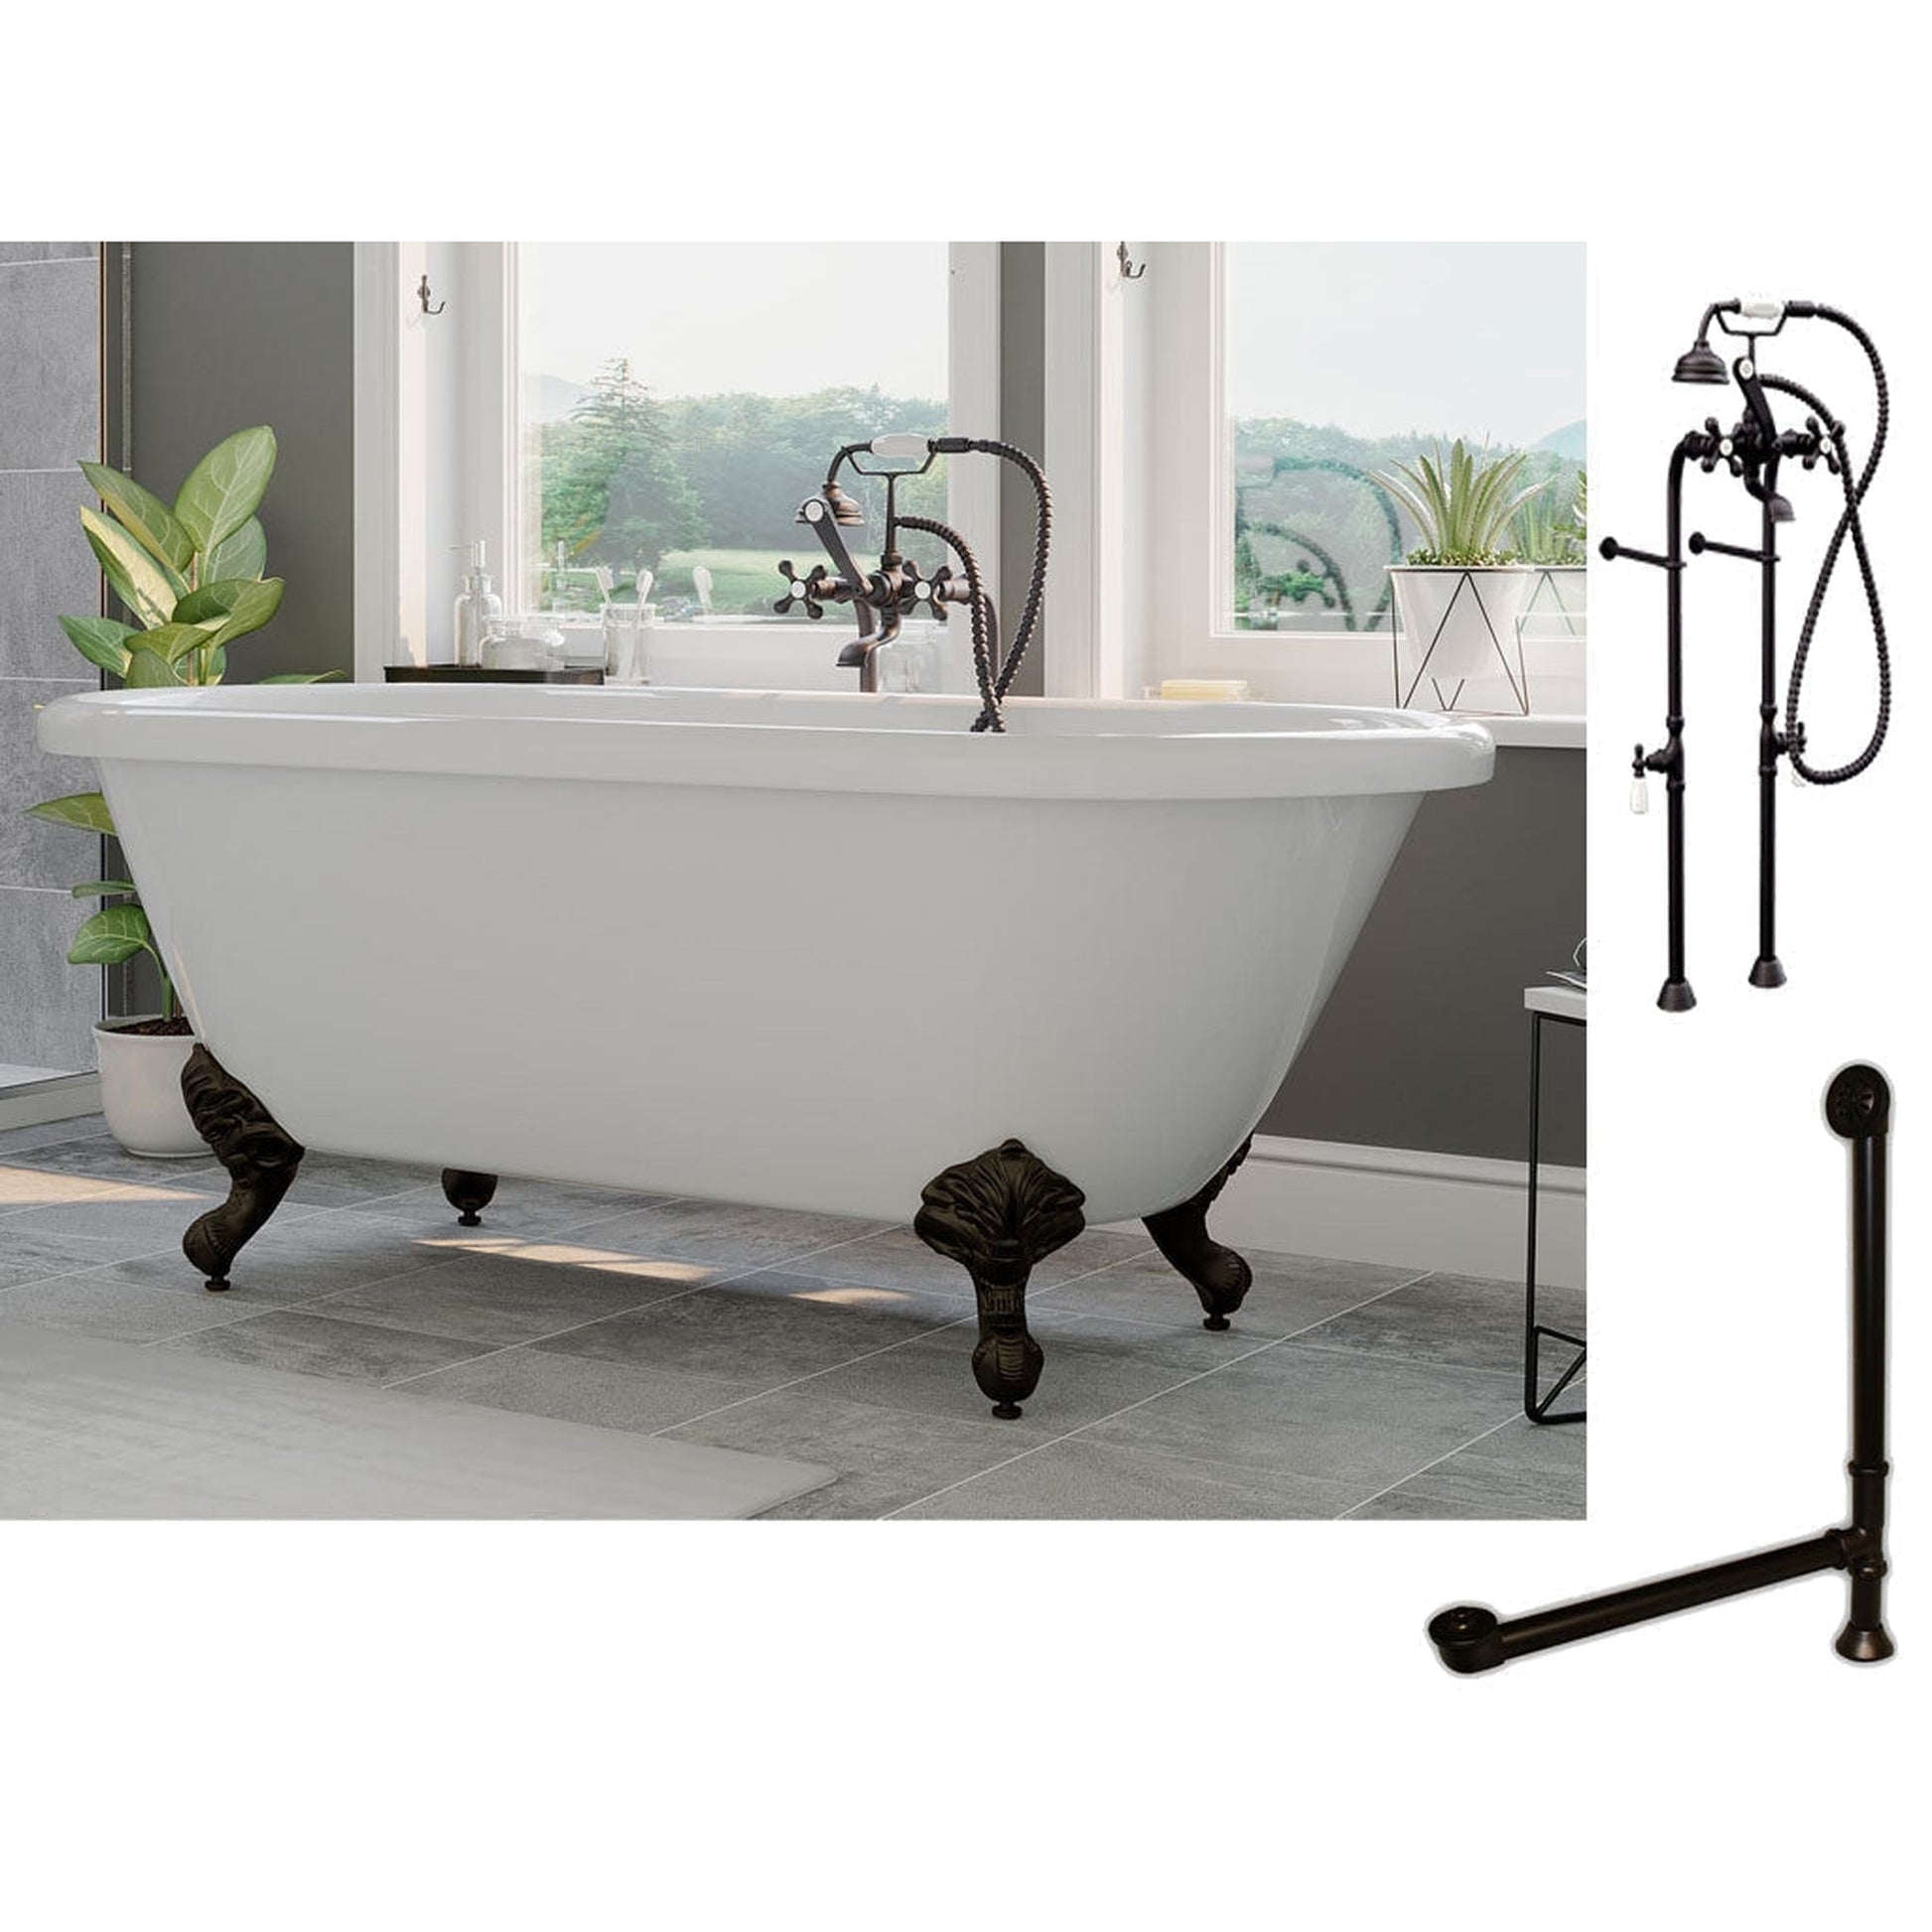 Cambridge Plumbing 70" White Acrylic Double Ended Clawfoot Bathtub With No Deck Holes And Complete Plumbing Package Including Floor Mounted British Telephone Faucet, Drain And Overflow Assembly In Oil Rubbed Bronze